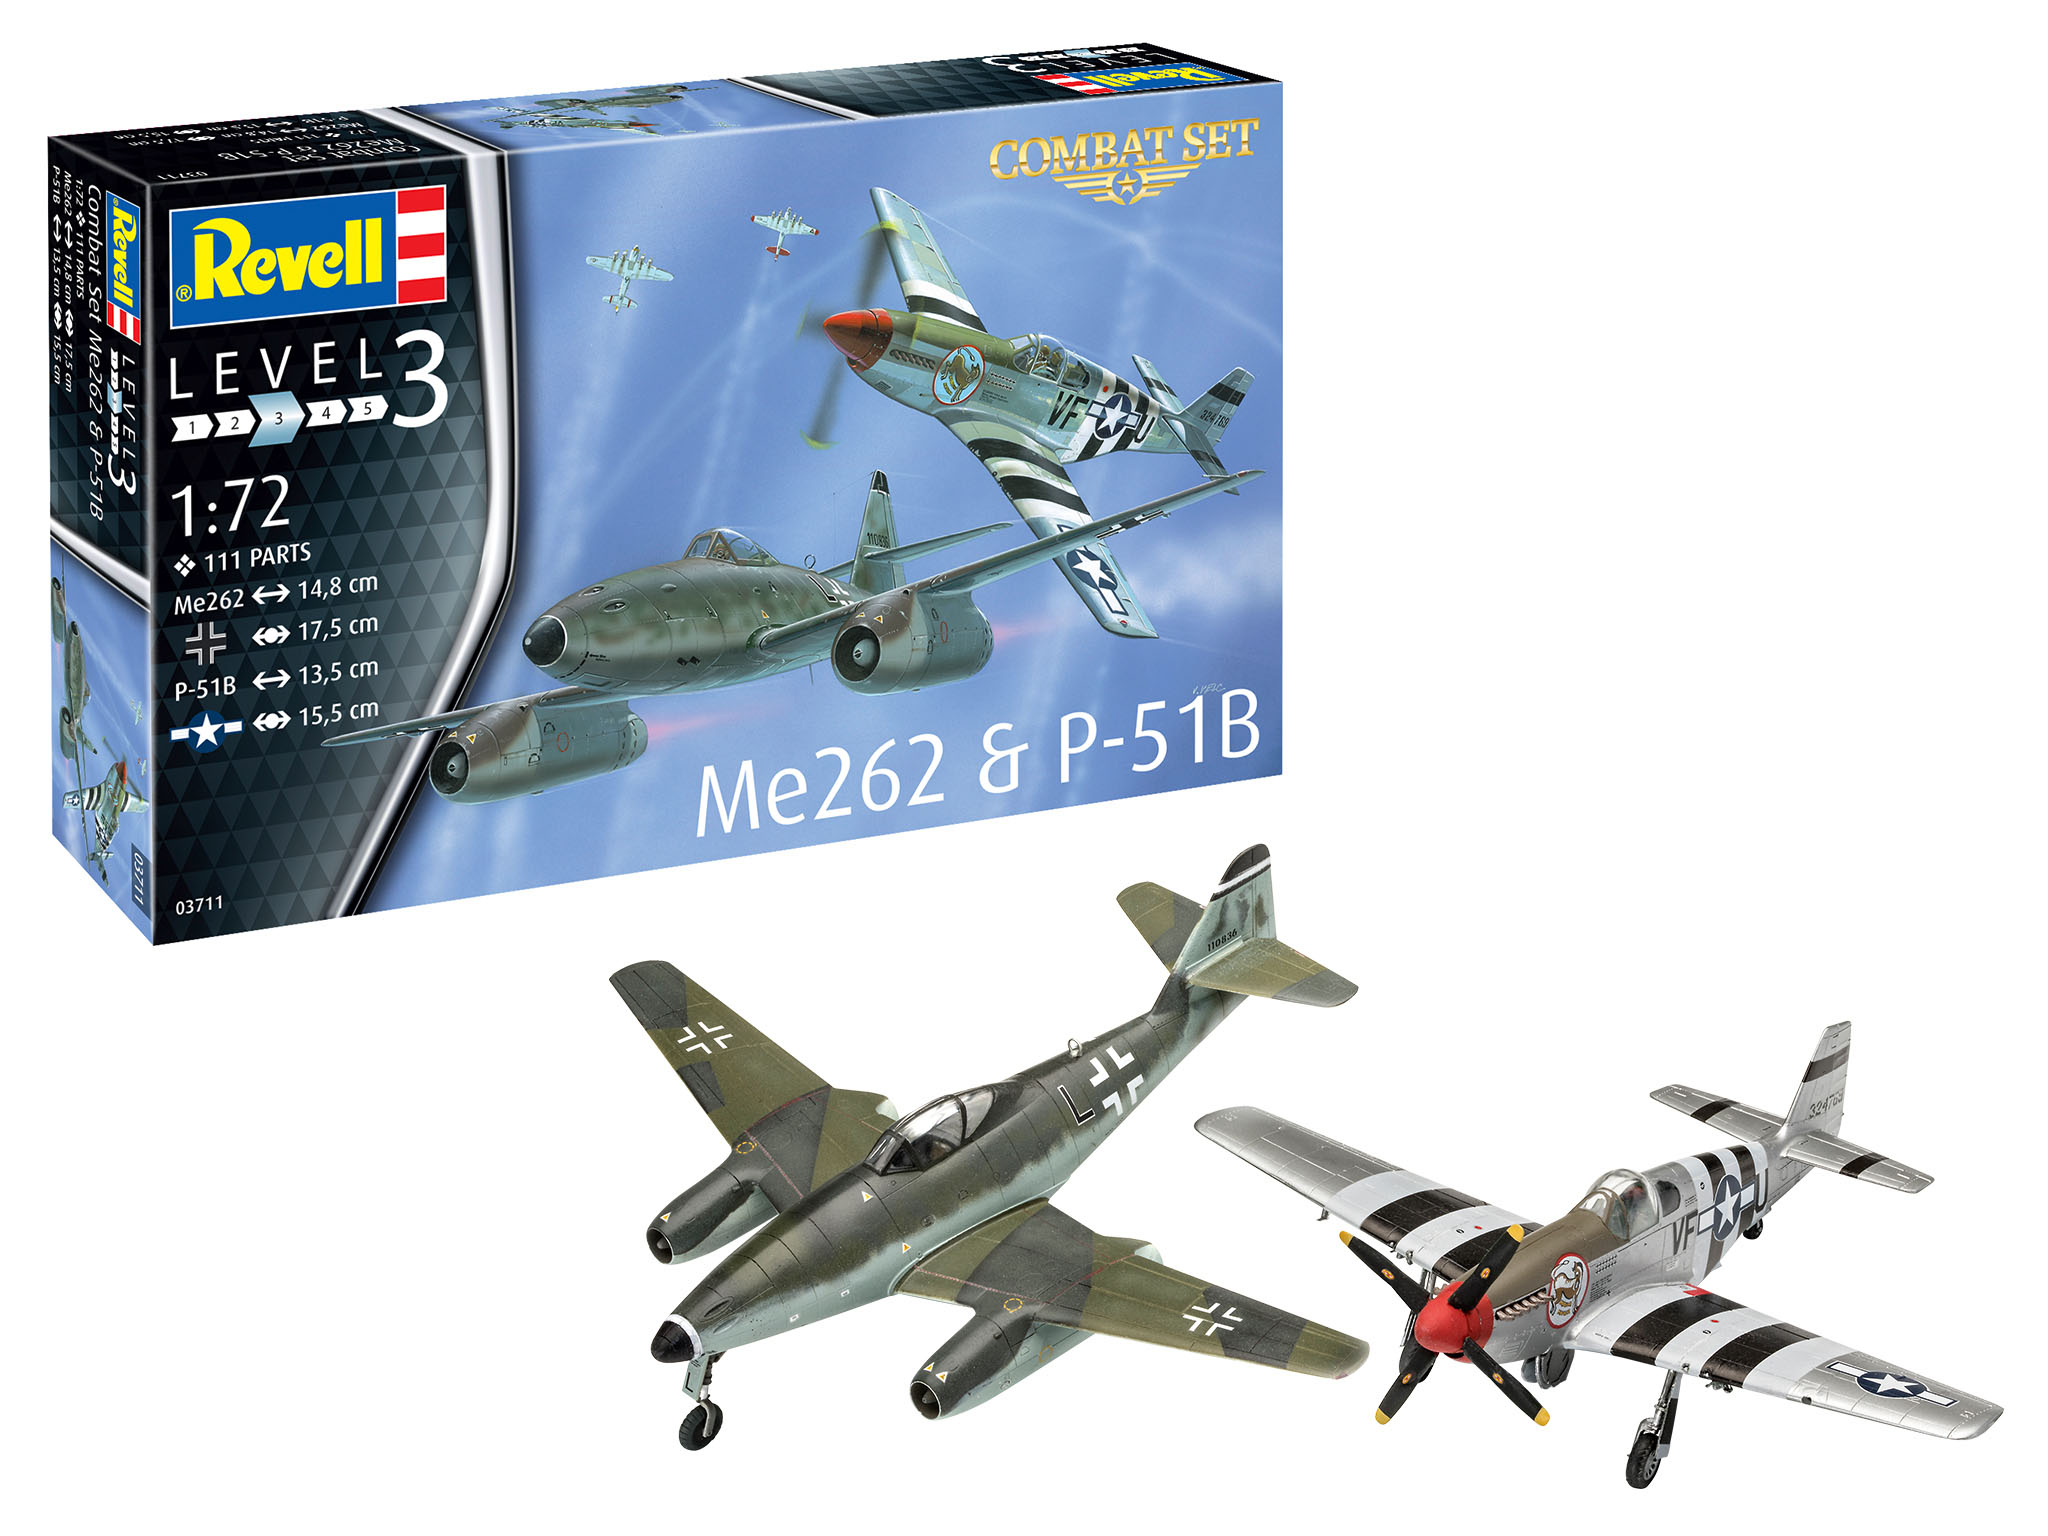 Revell  #03875 1/32 Me262A-1 Jetfighter